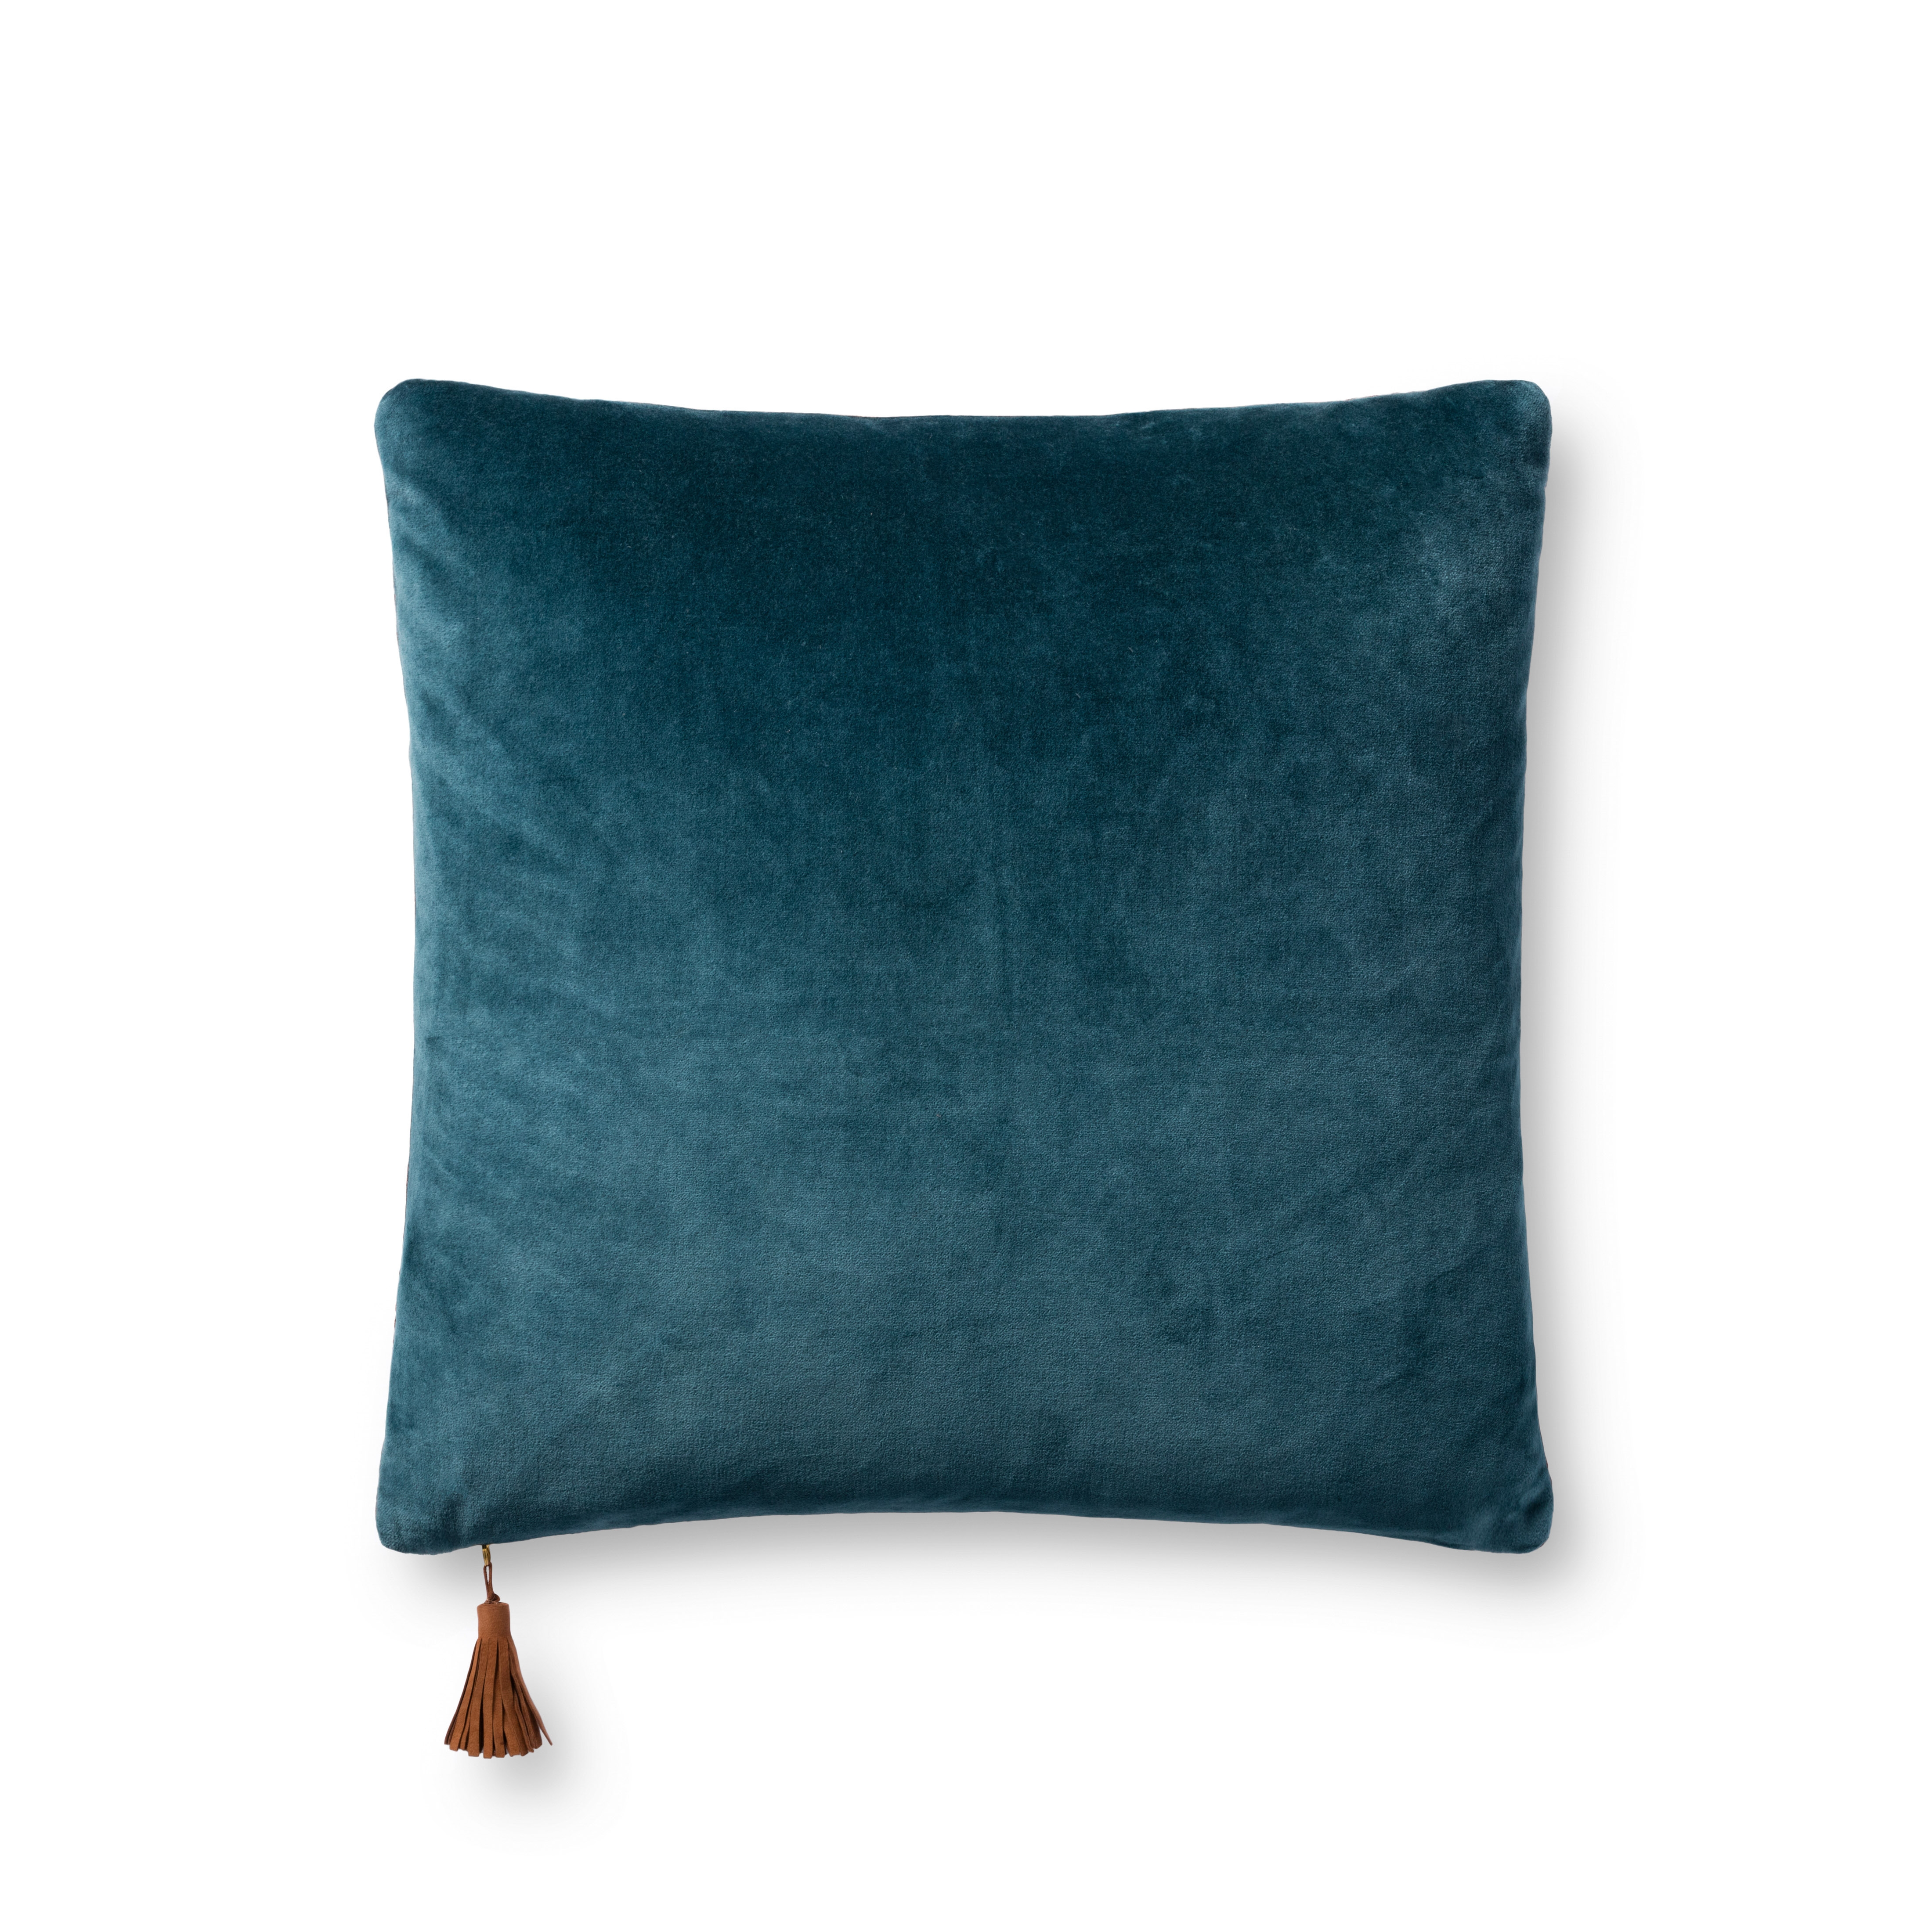 Magnolia Home by Joanna Gaines x Loloi Pillows P1153 Navy / Coffee 18" x 18" Cover Only - Image 0